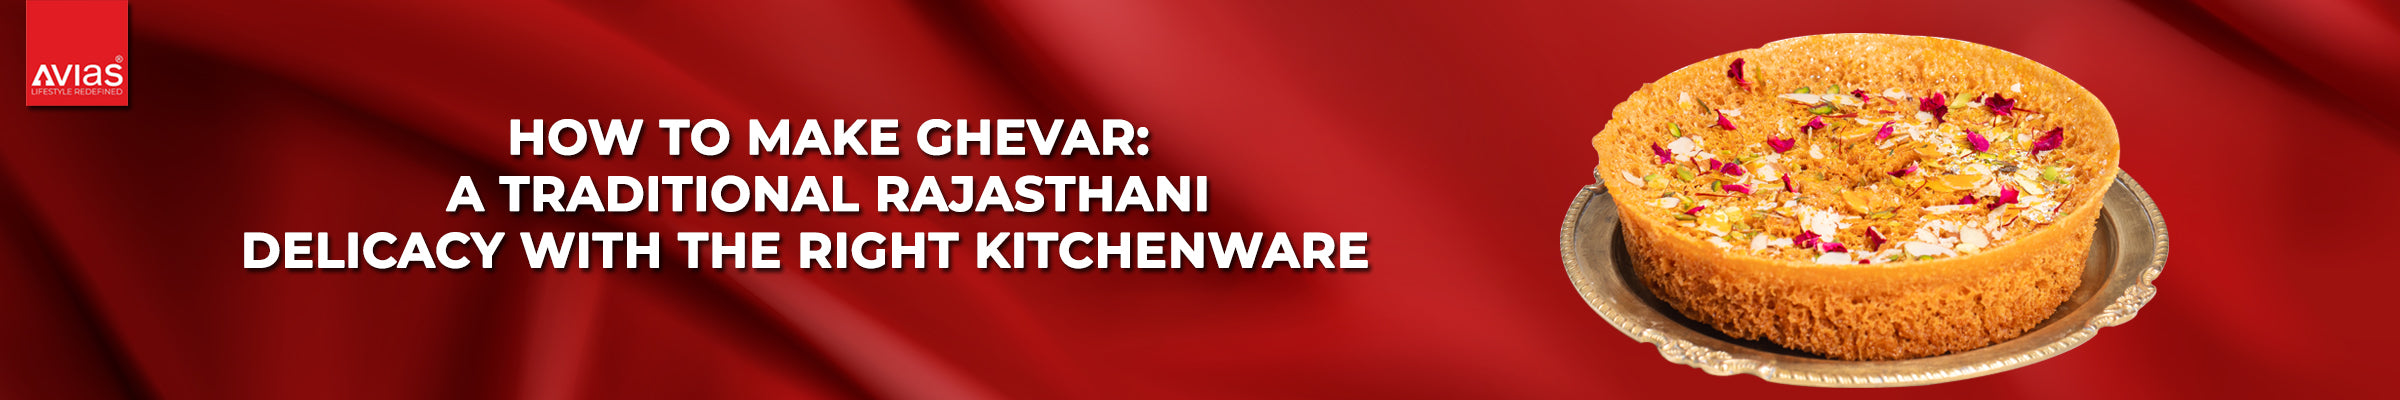 How to Make Ghevar: A Traditional Rajasthani Delicacy with the Right Kitchenware